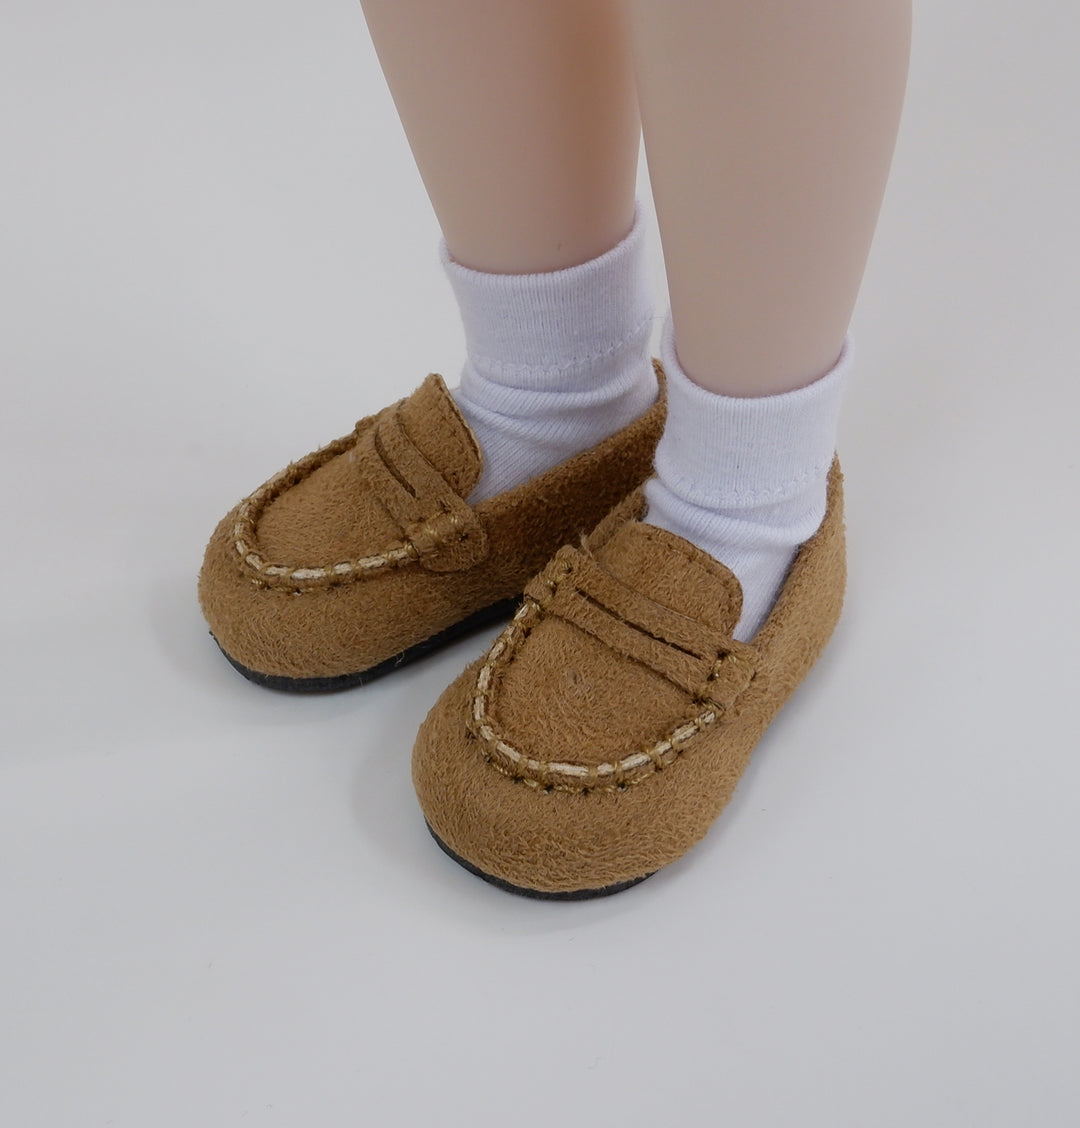 Penny Loafers Shoes - 58mm - Fashion Friends doll shoes